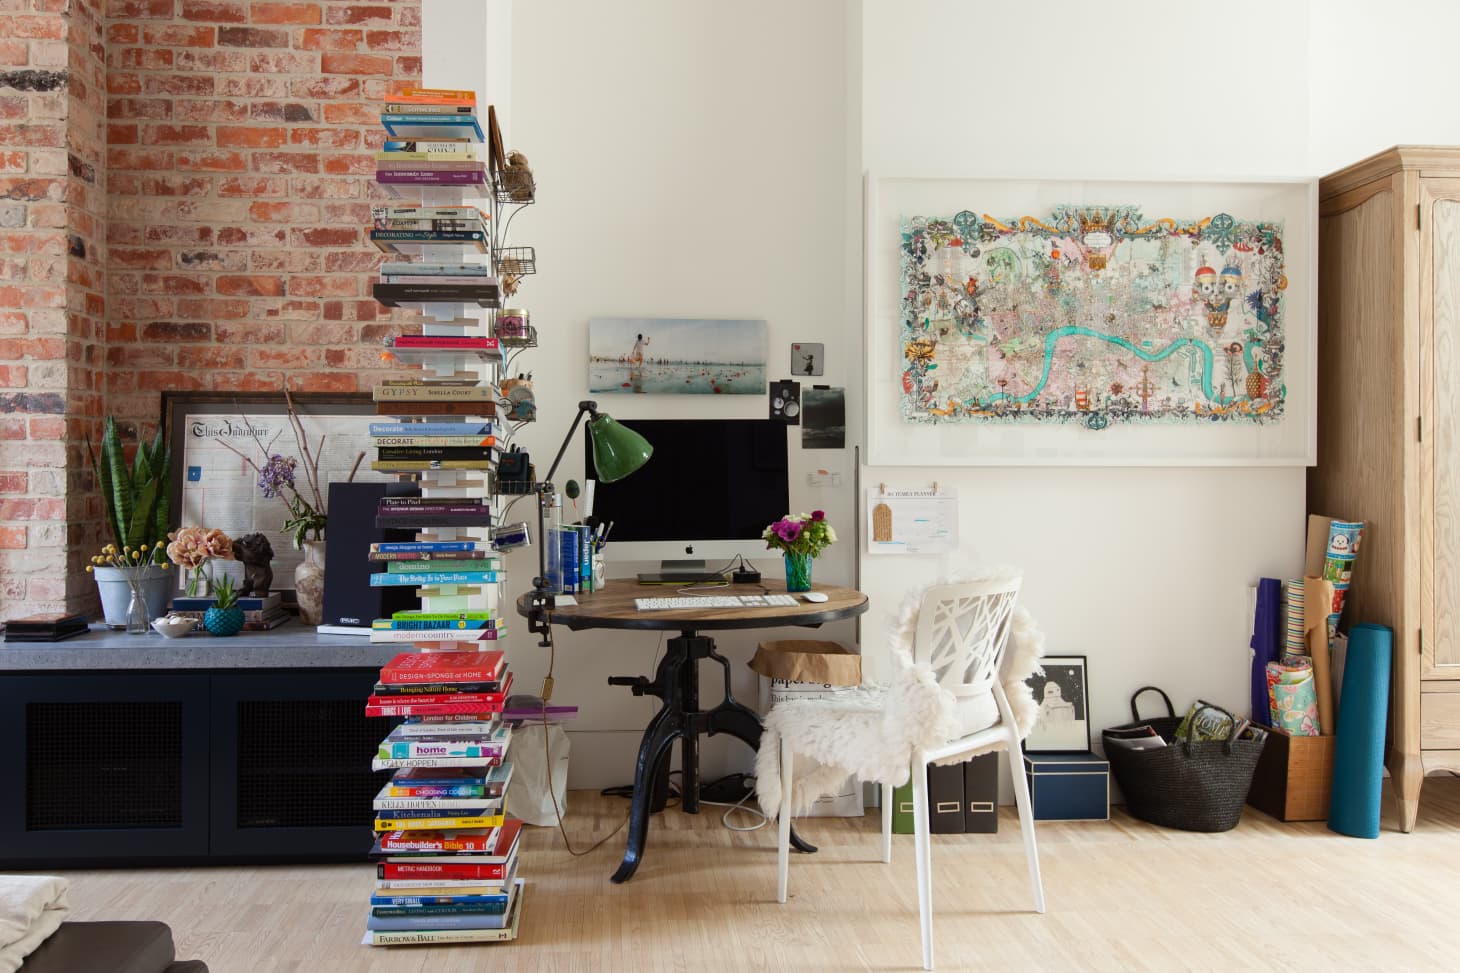 10 Perfect Living Room Home Office Nooks: Short on Space but Not Style